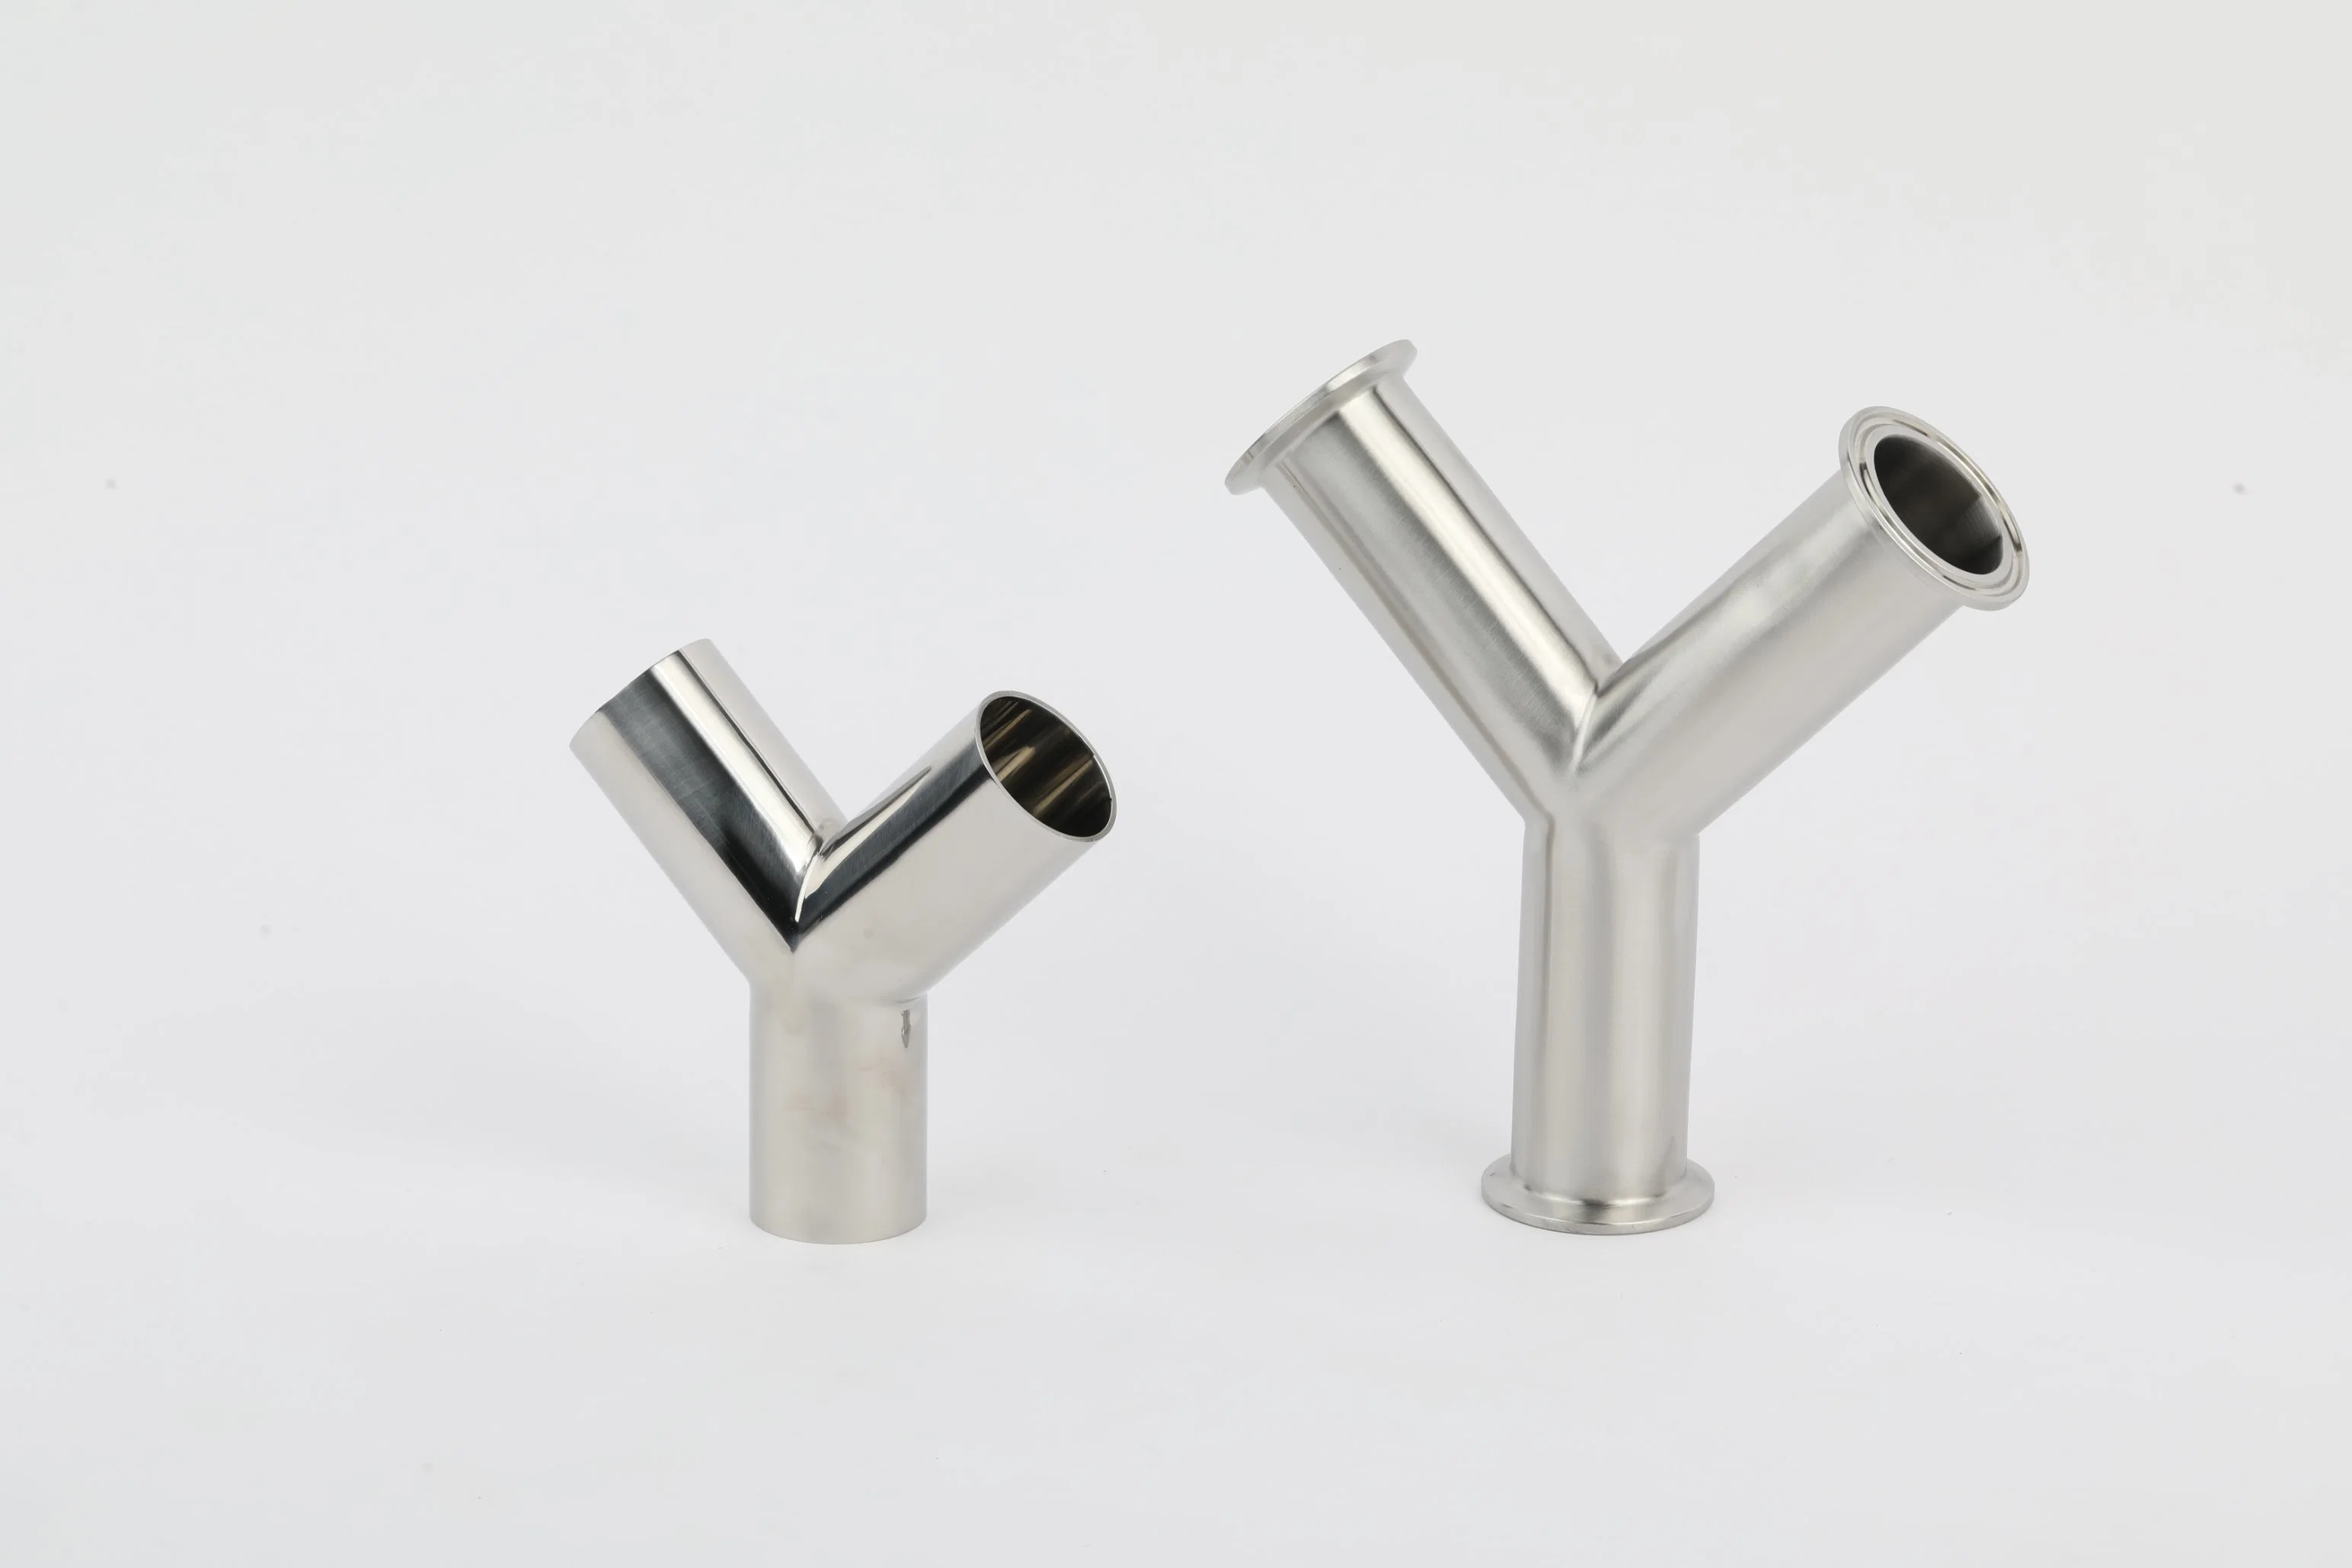 DIN/SMS/3A/BS Sanitary Stainless Steel Pipe Fittings Equal Tee Reducing Tee